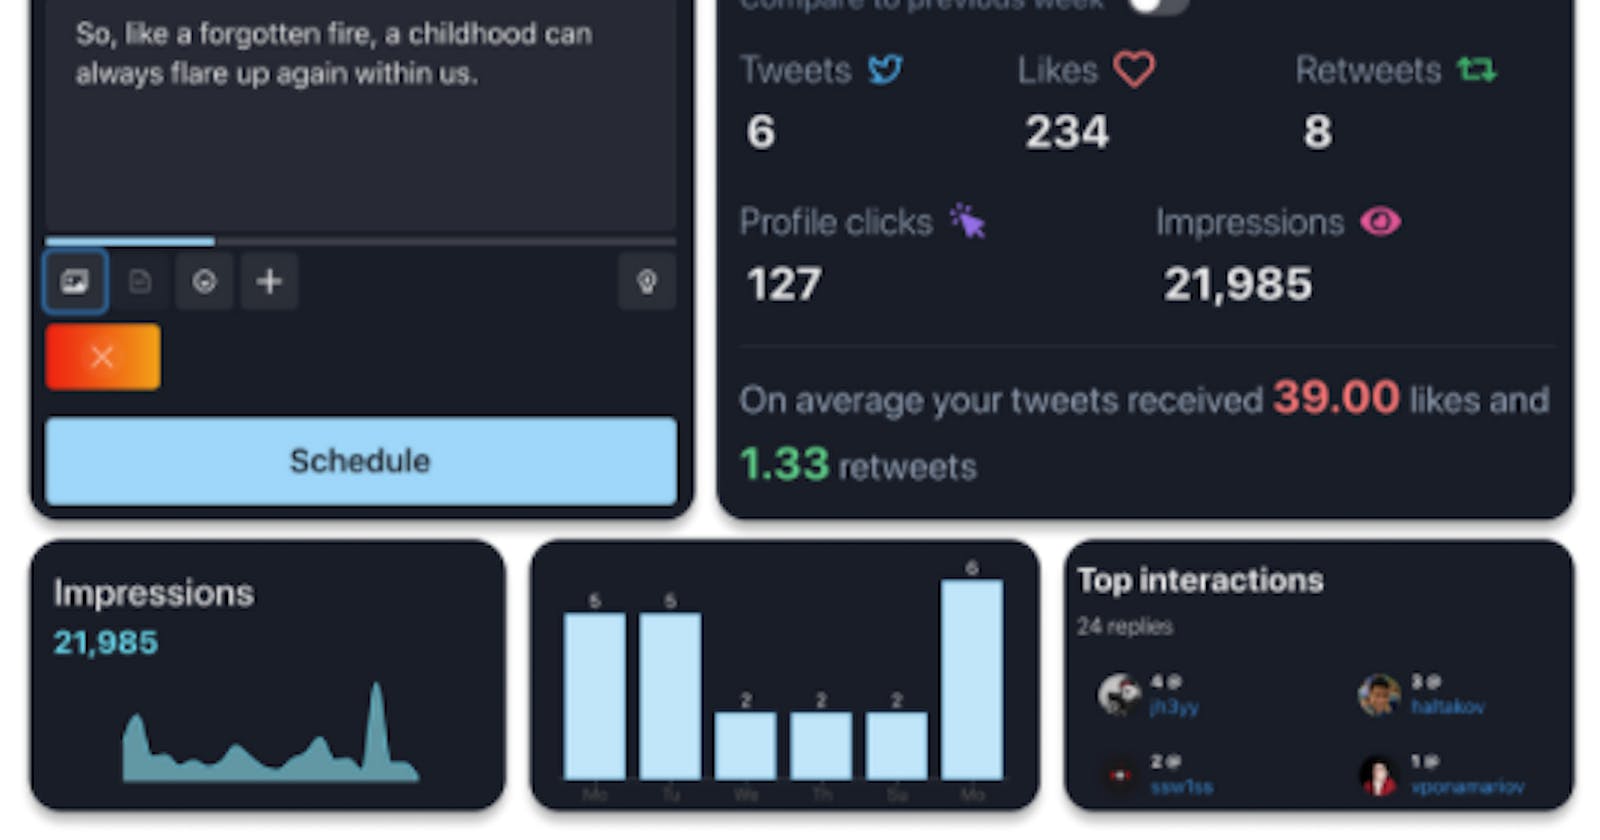 How to become more visible in Twitter with Tweetastic